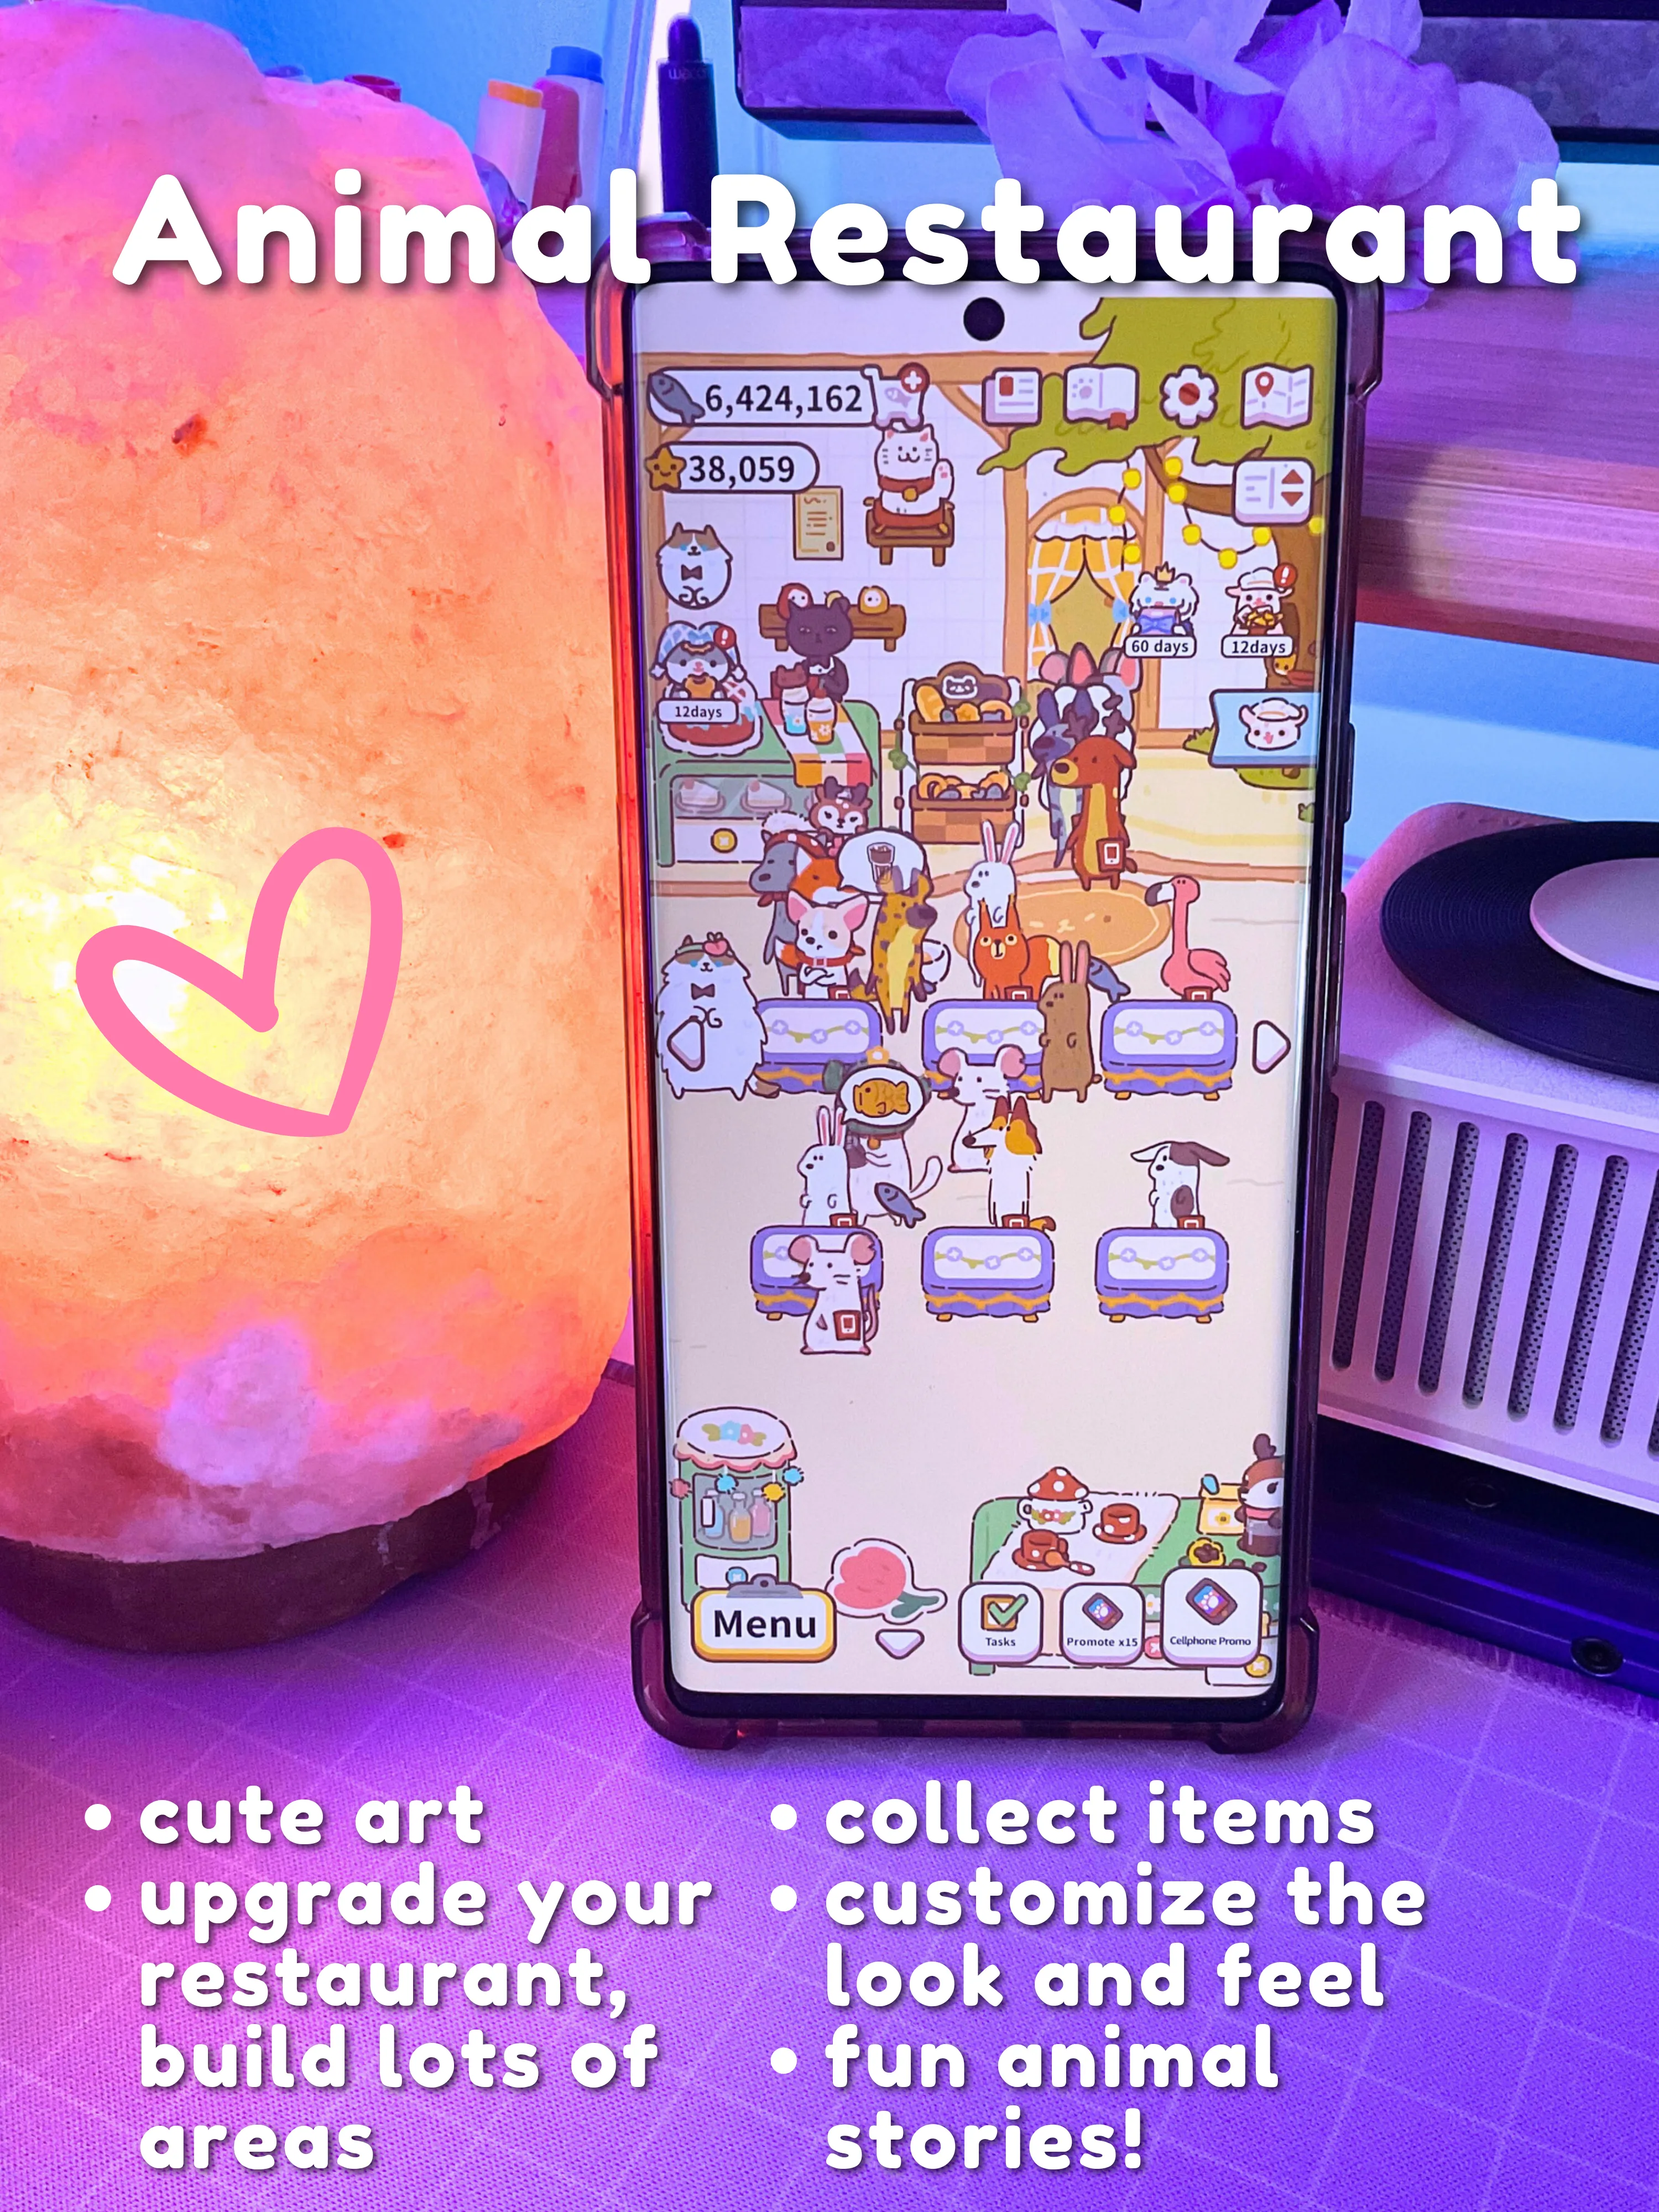 aesthetic and fun games to play when you are bored ☁ cute & comfy games 🧸  